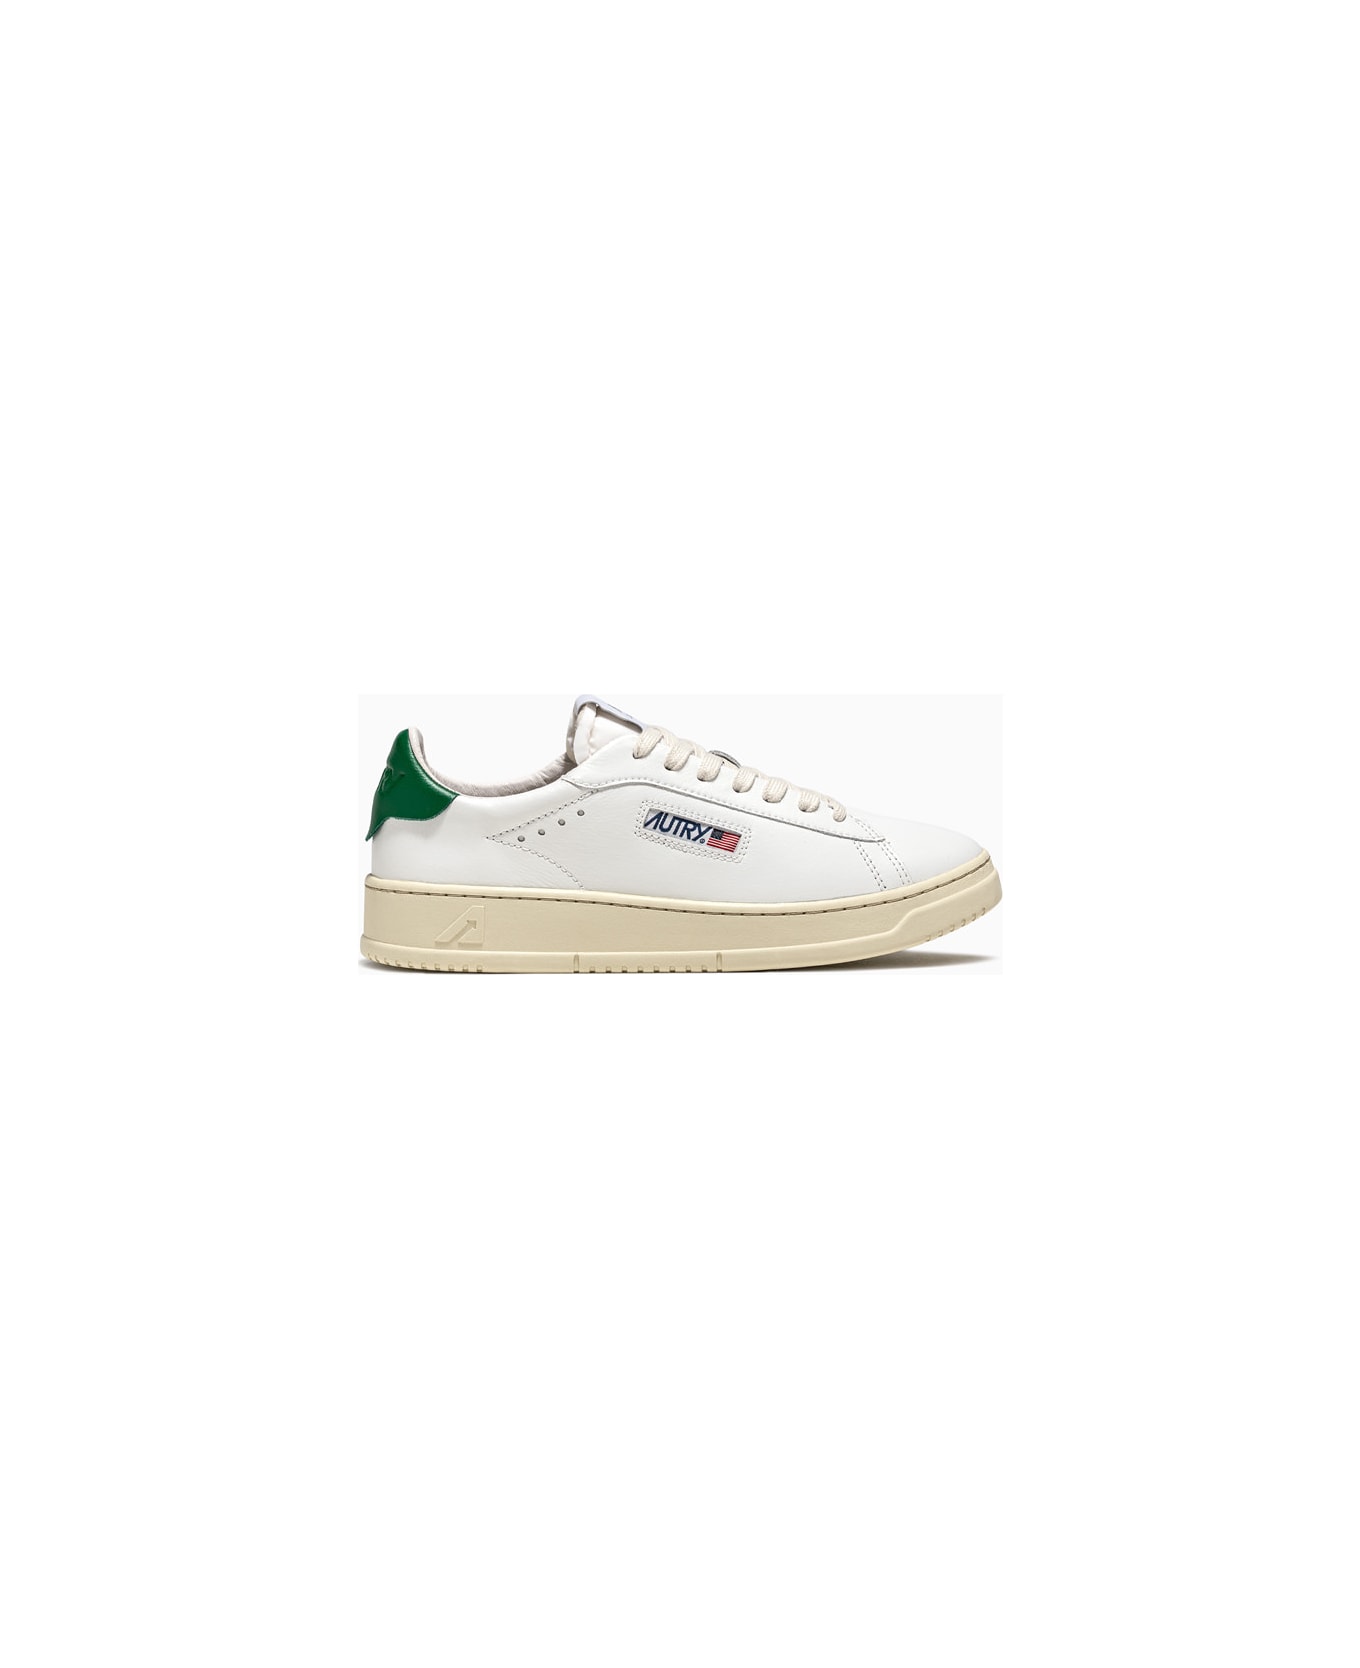 Autry Dallas Low Sneakers Adlw Nw02 - LEAT/LEAT WHT/AM